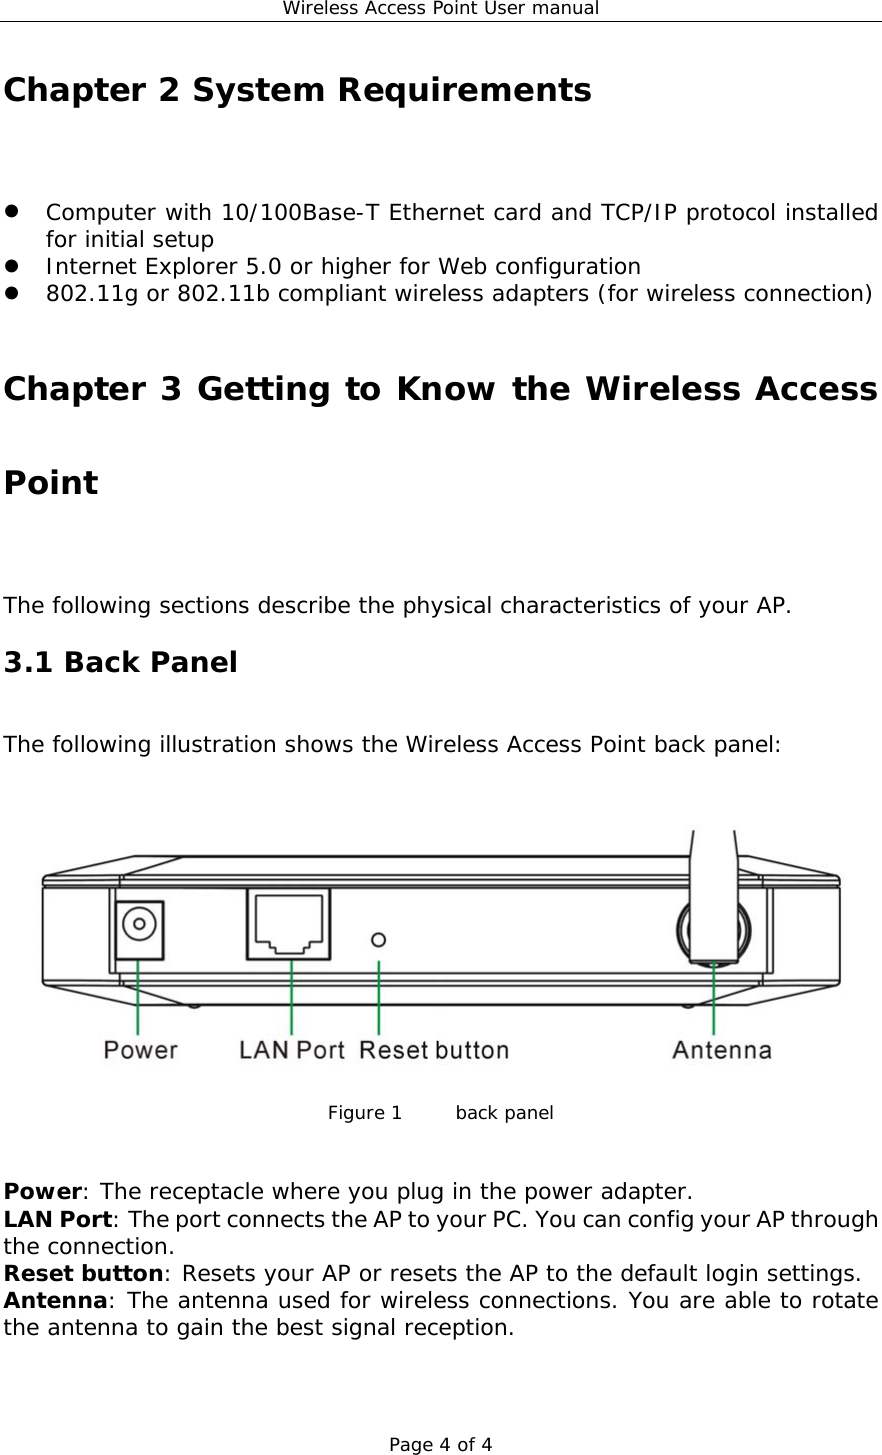 Wireless Access Point User manual Page 4 of 4 Chapter 2 System Requirements   Computer with 10/100Base-T Ethernet card and TCP/IP protocol installed for initial setup   Internet Explorer 5.0 or higher for Web configuration   802.11g or 802.11b compliant wireless adapters (for wireless connection)  Chapter 3 Getting to Know the Wireless Access Point The following sections describe the physical characteristics of your AP. 3.1 Back Panel The following illustration shows the Wireless Access Point back panel:   Figure 1   back panel   Power: The receptacle where you plug in the power adapter. LAN Port: The port connects the AP to your PC. You can config your AP through the connection. Reset button: Resets your AP or resets the AP to the default login settings. Antenna: The antenna used for wireless connections. You are able to rotate the antenna to gain the best signal reception.   